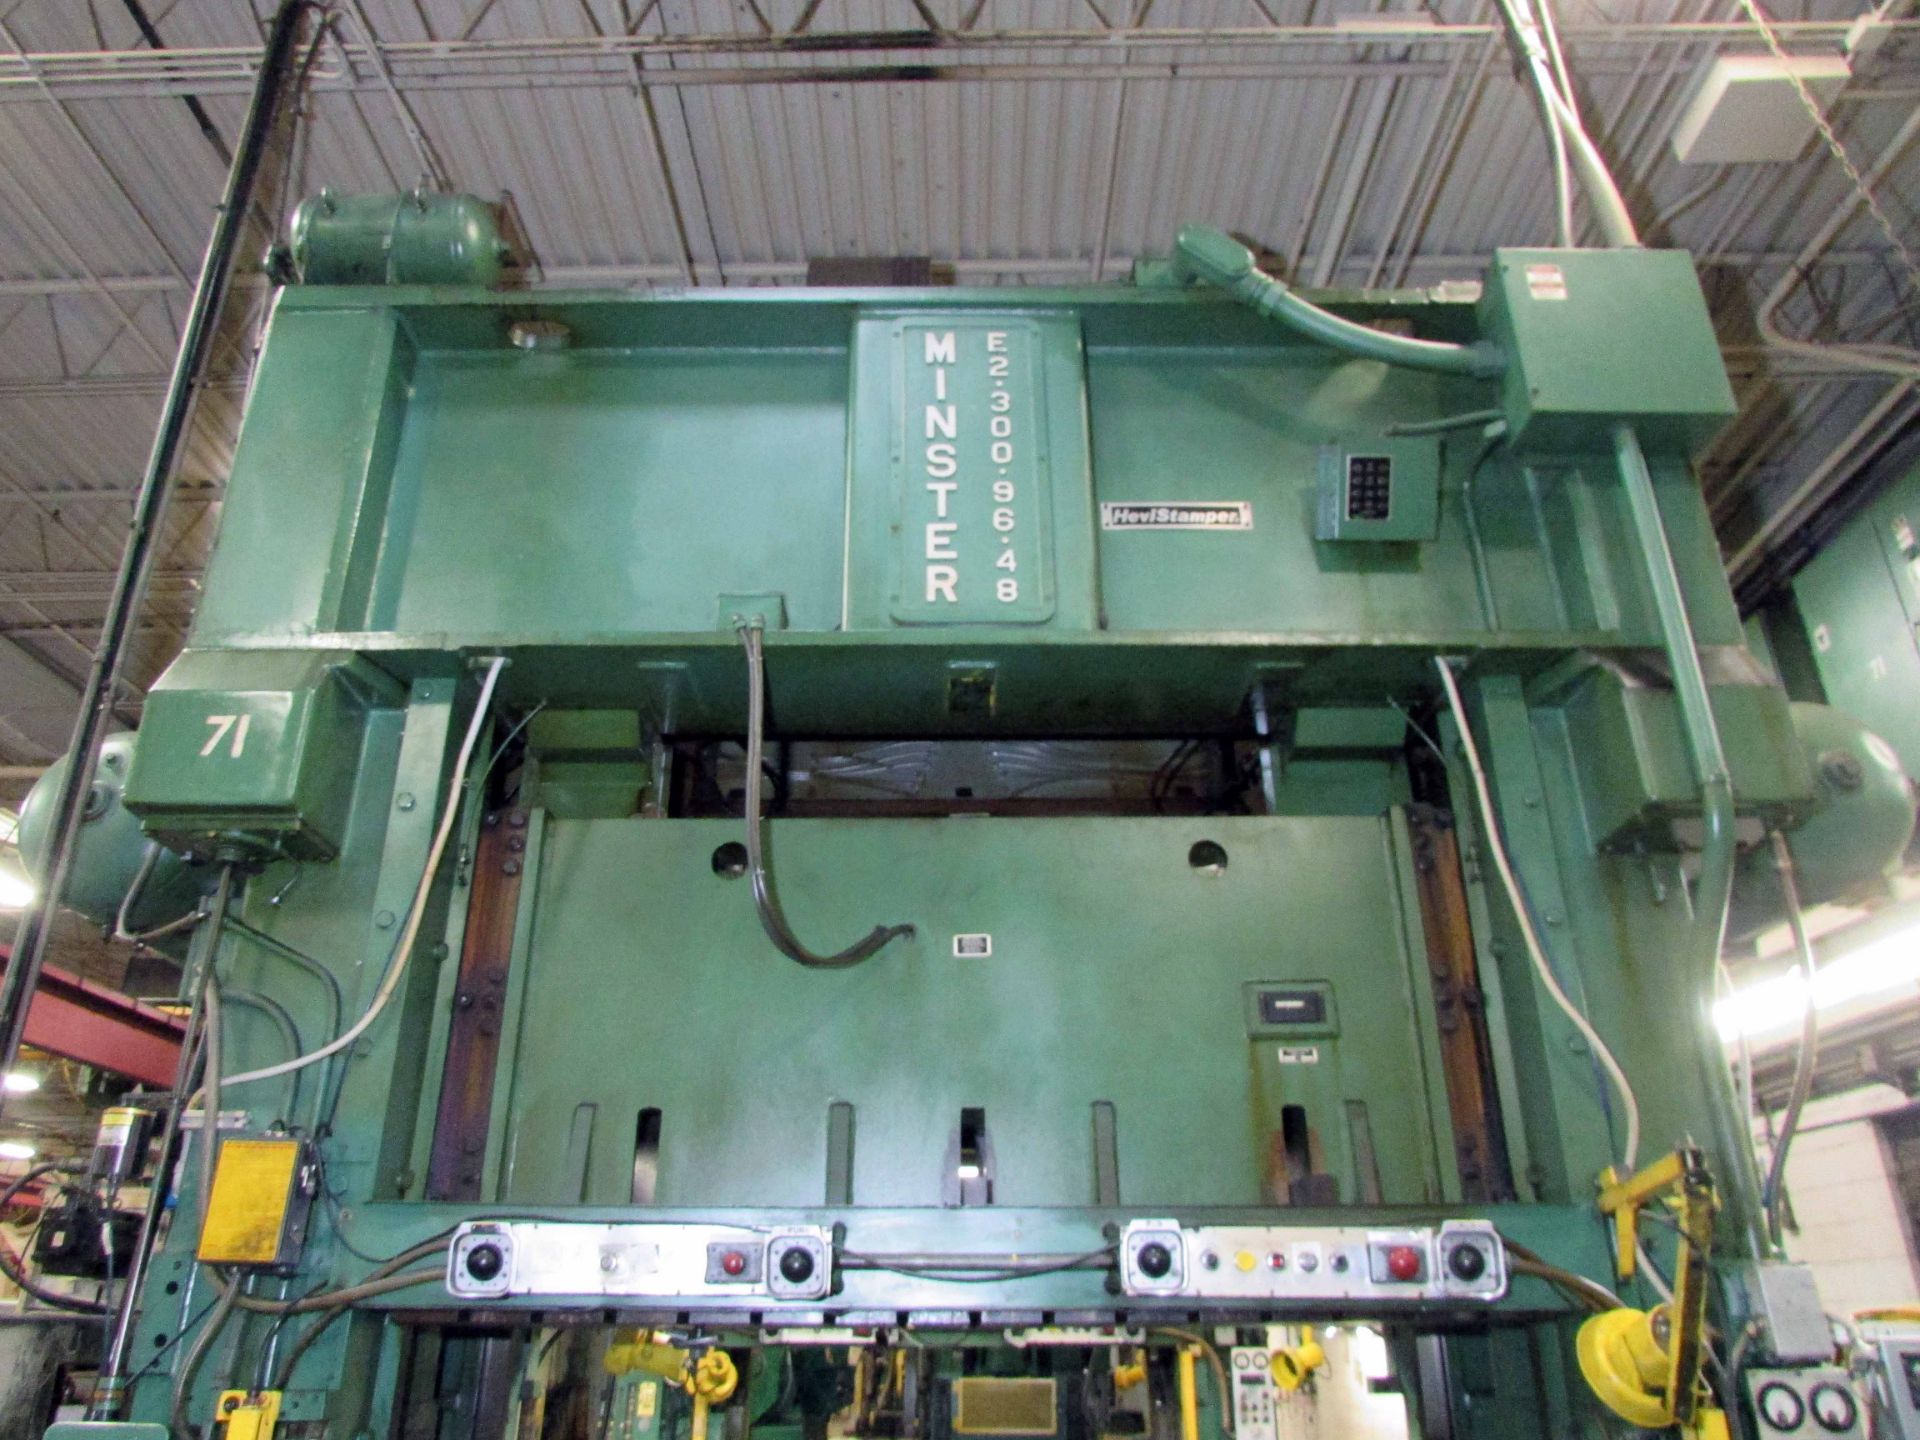 STRAIGHT SIDE 2-POINT ECCENTRIC GEARED PRESS, MINSTER 300 T. CAP. MDL. E2-300-96-48 “HEVI-STAMPER” - Image 4 of 23